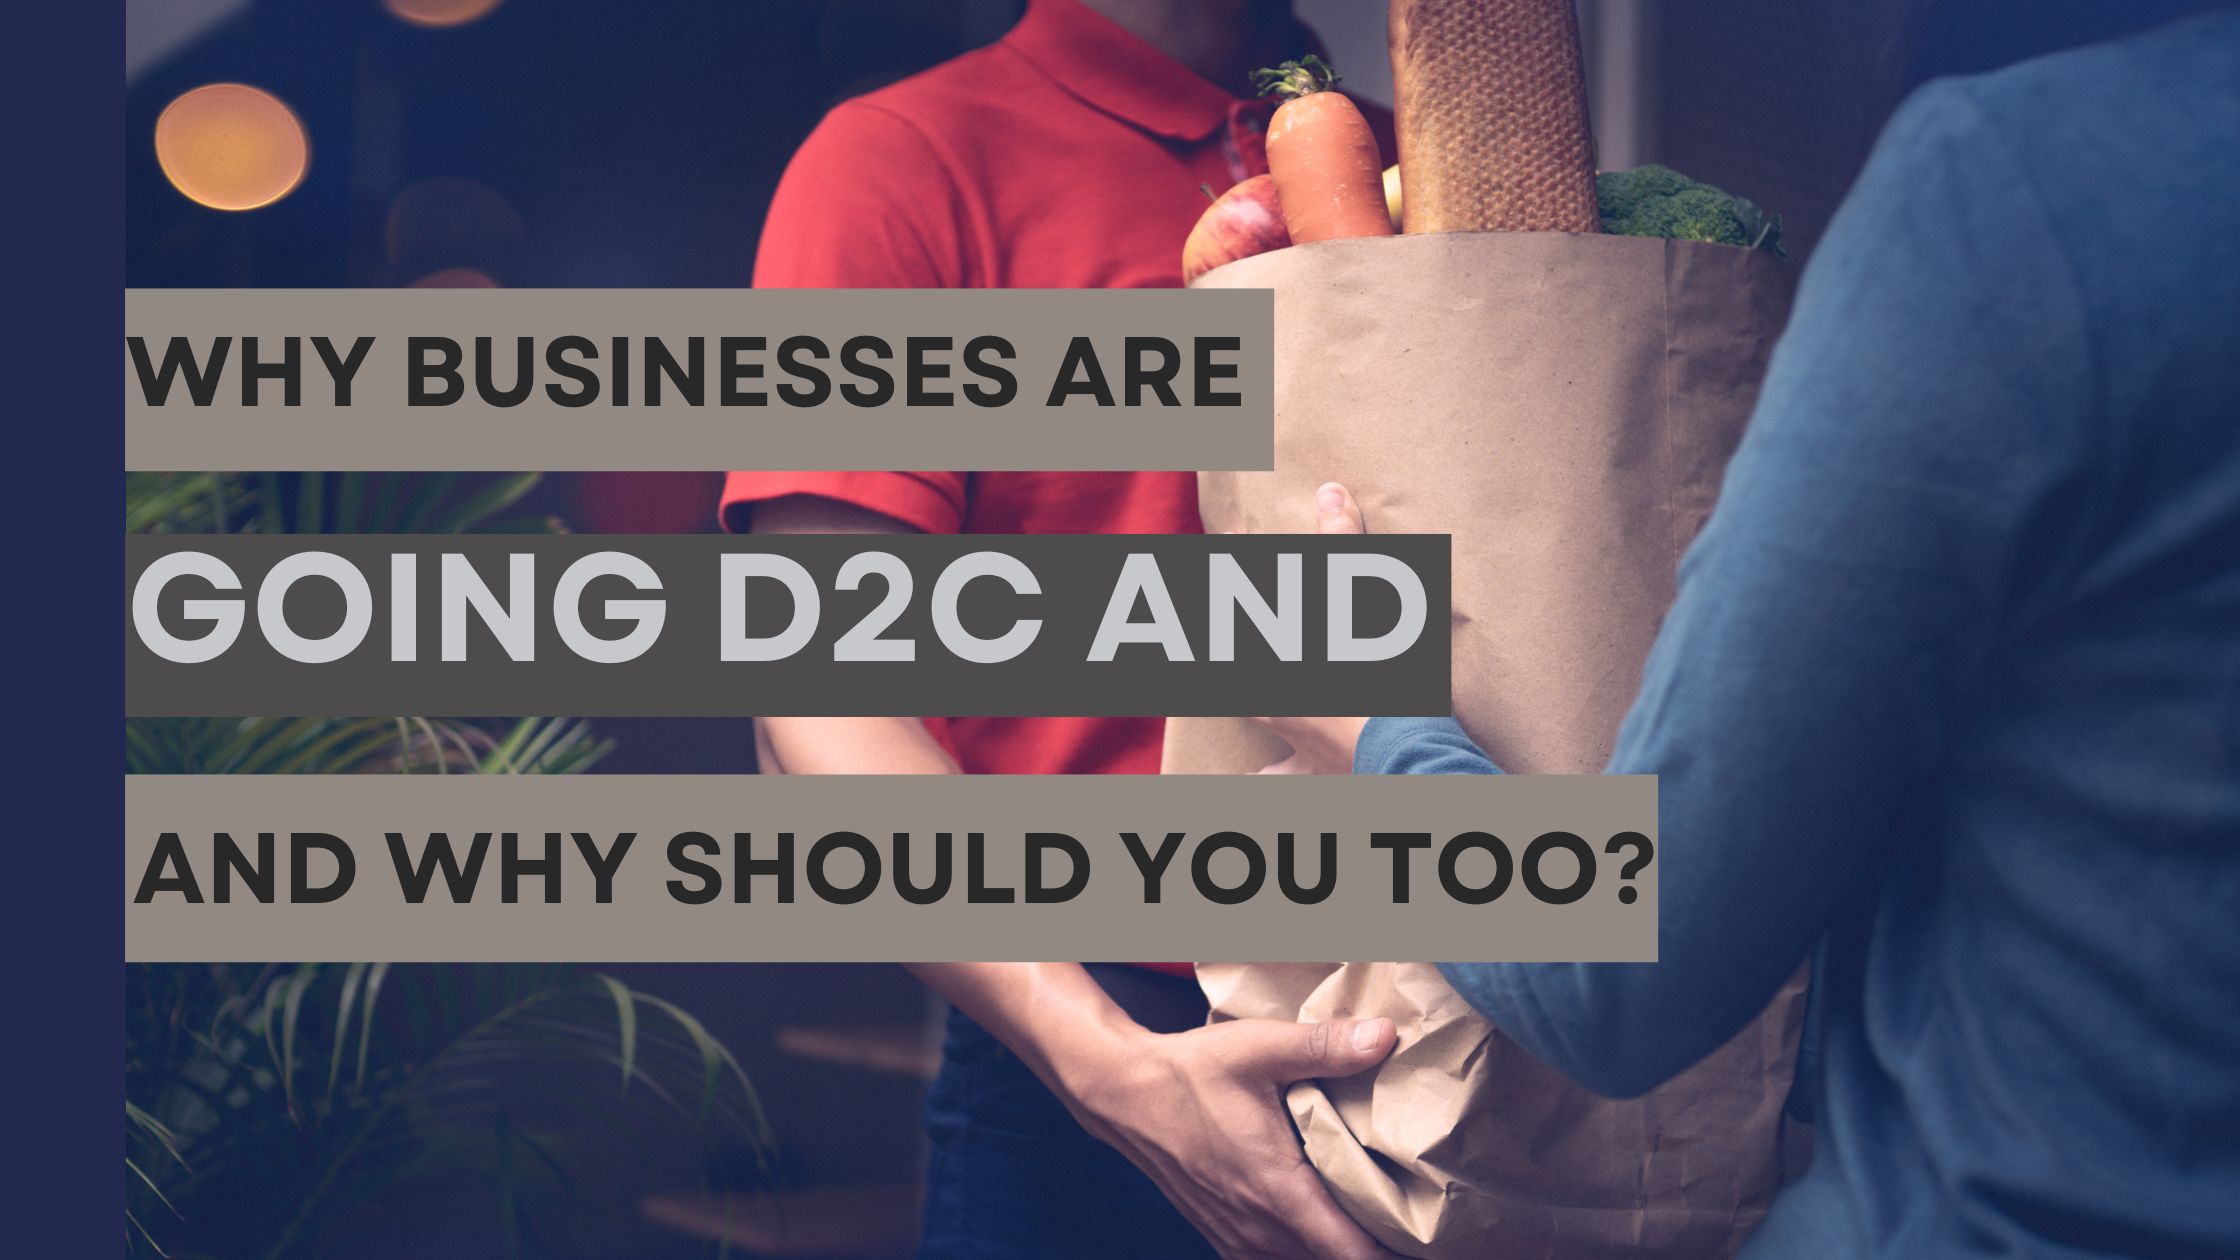 Why businesses are going D2C?